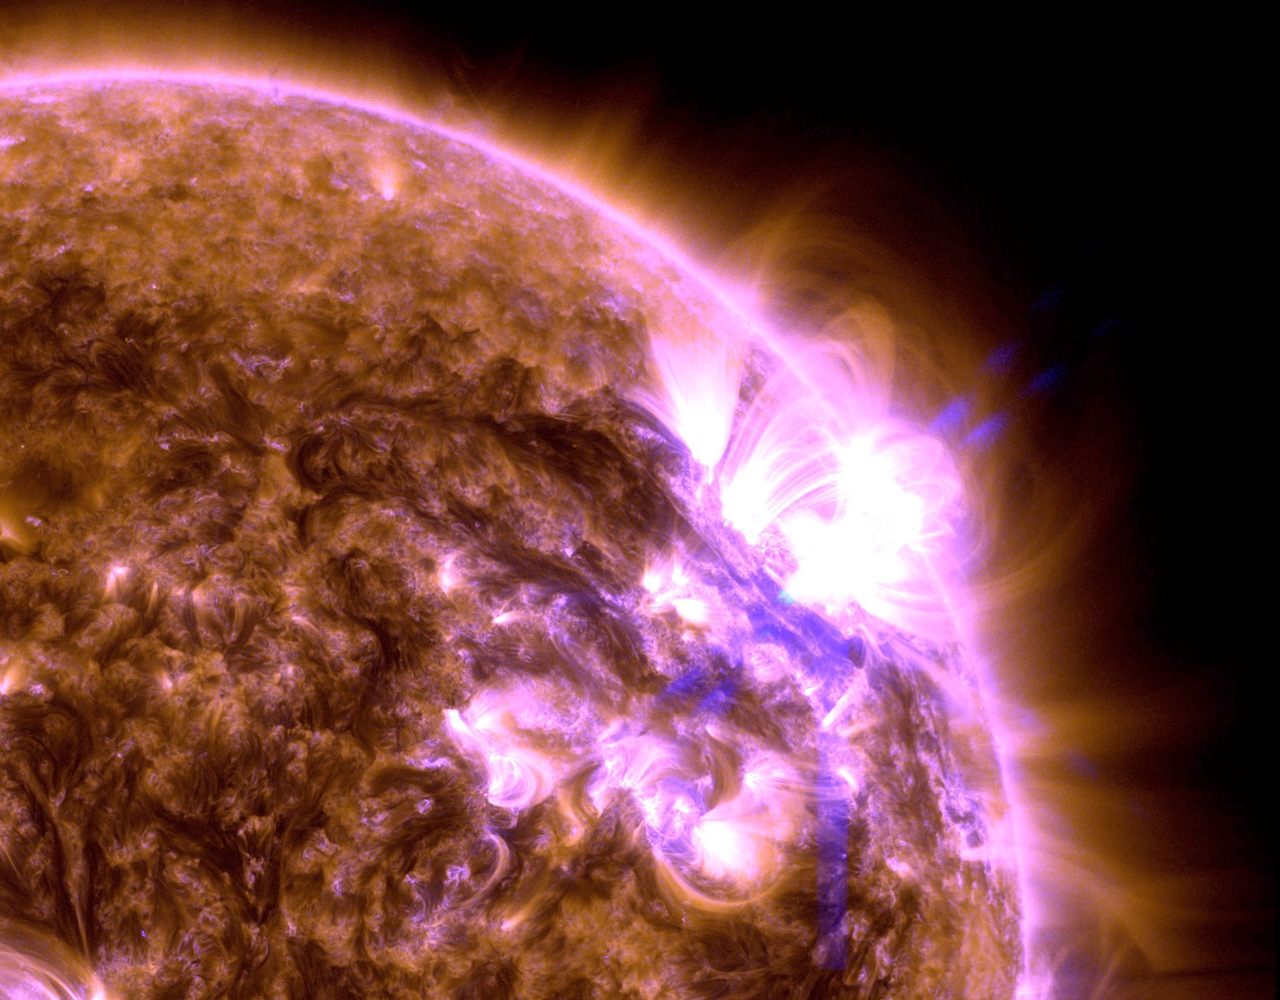 On May 8, a strong solar flare, seen here in subsets of extreme ultraviolet light, was just one in a cluster of X-flares, the most powerful rating on the space weather scale.